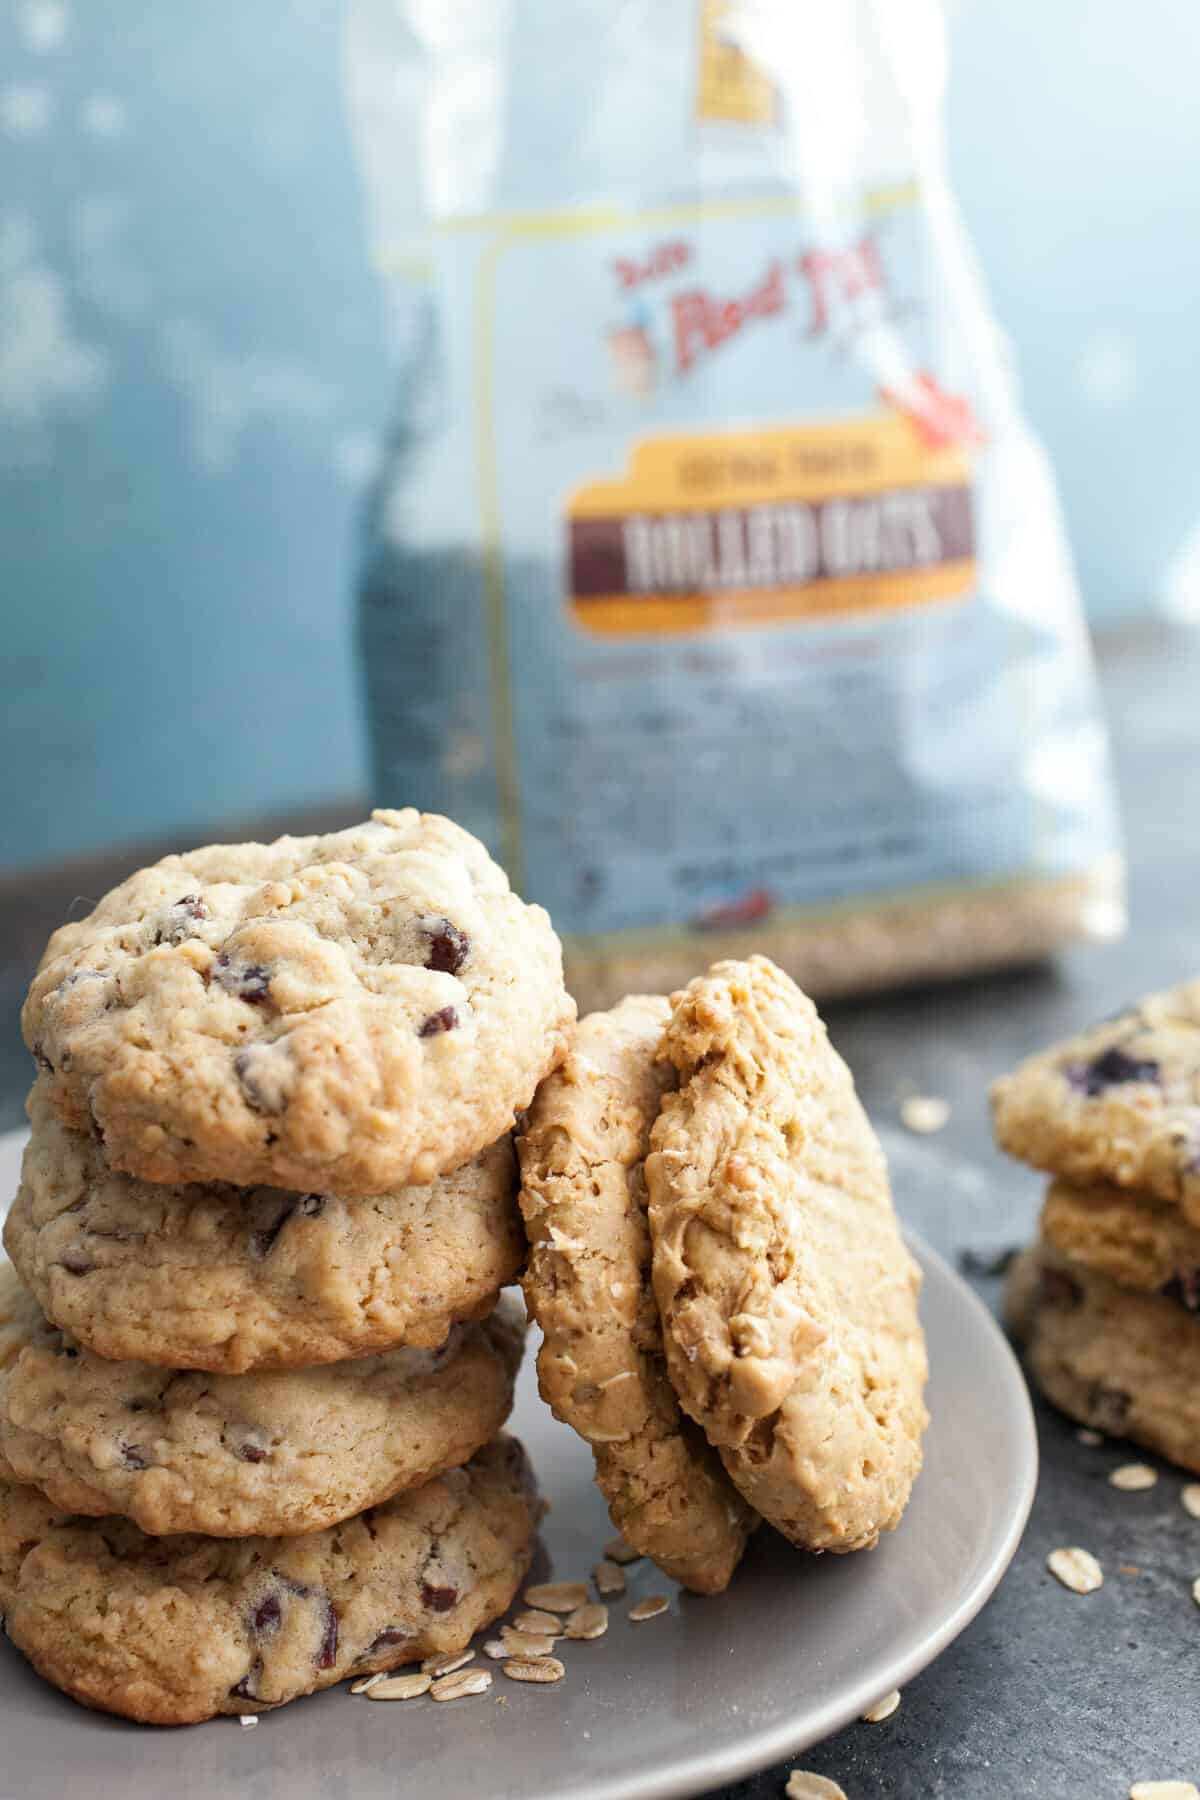 Oatmeal Cookies Three Ways: Basic oatmeal cookies with three new twists on them. If you're an oatmeal cookie fan, you'll want to try these! Versions include cherry chocolate, blueberry lemon, and peanut butter banana. | macheesmo.com